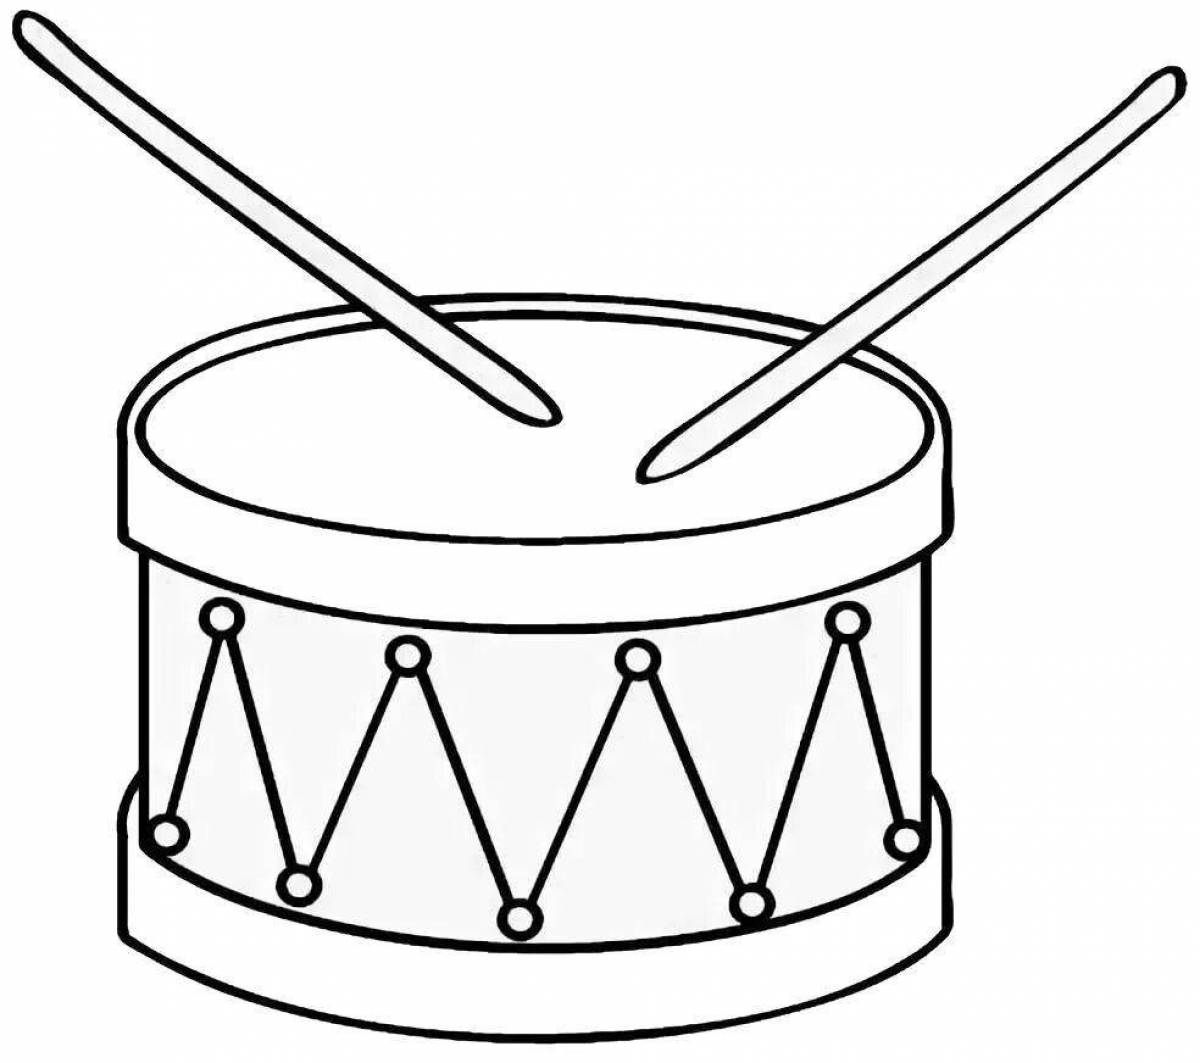 Bright drum coloring for kids